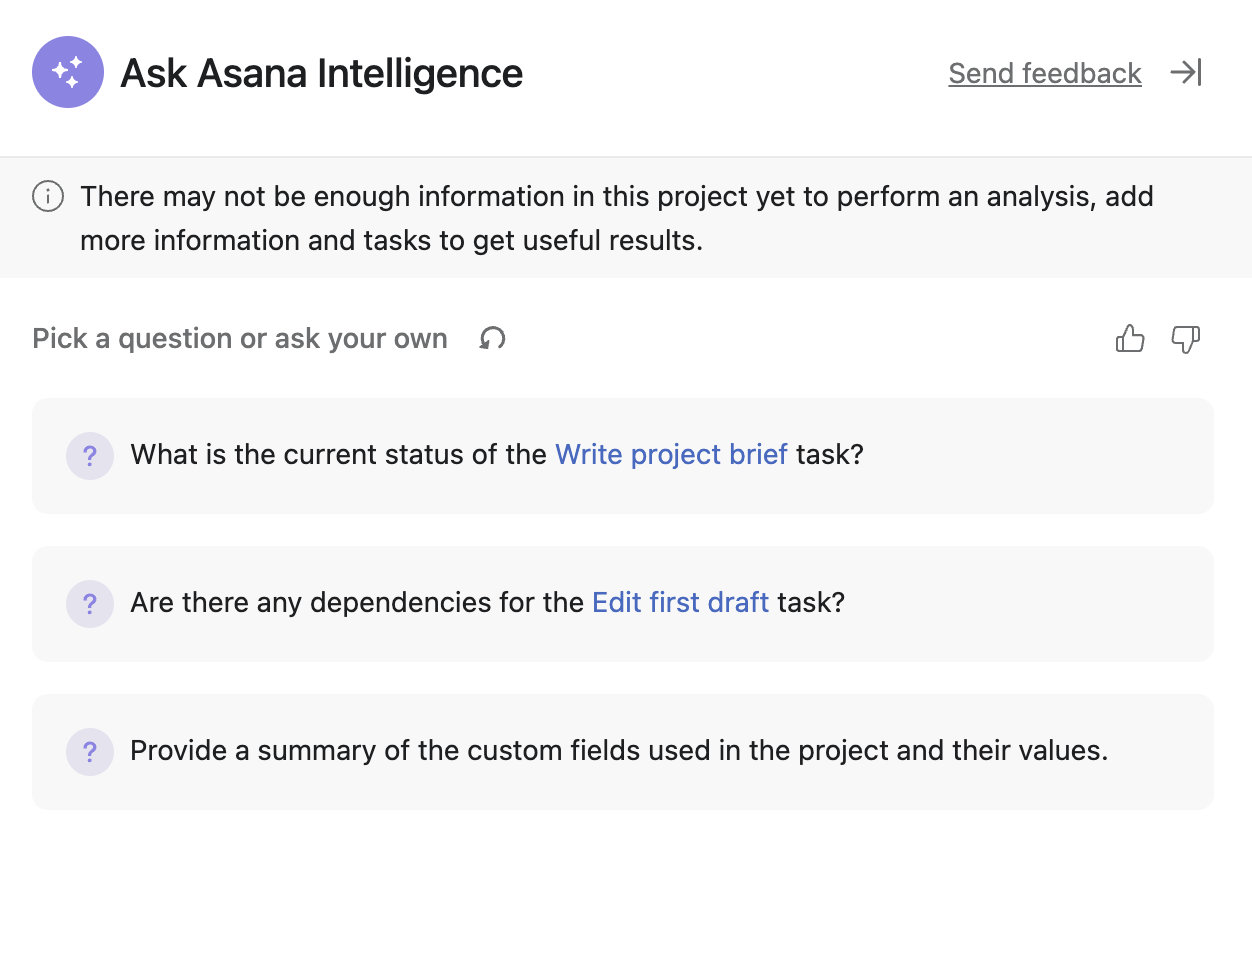 Asking Asana questions about your projects